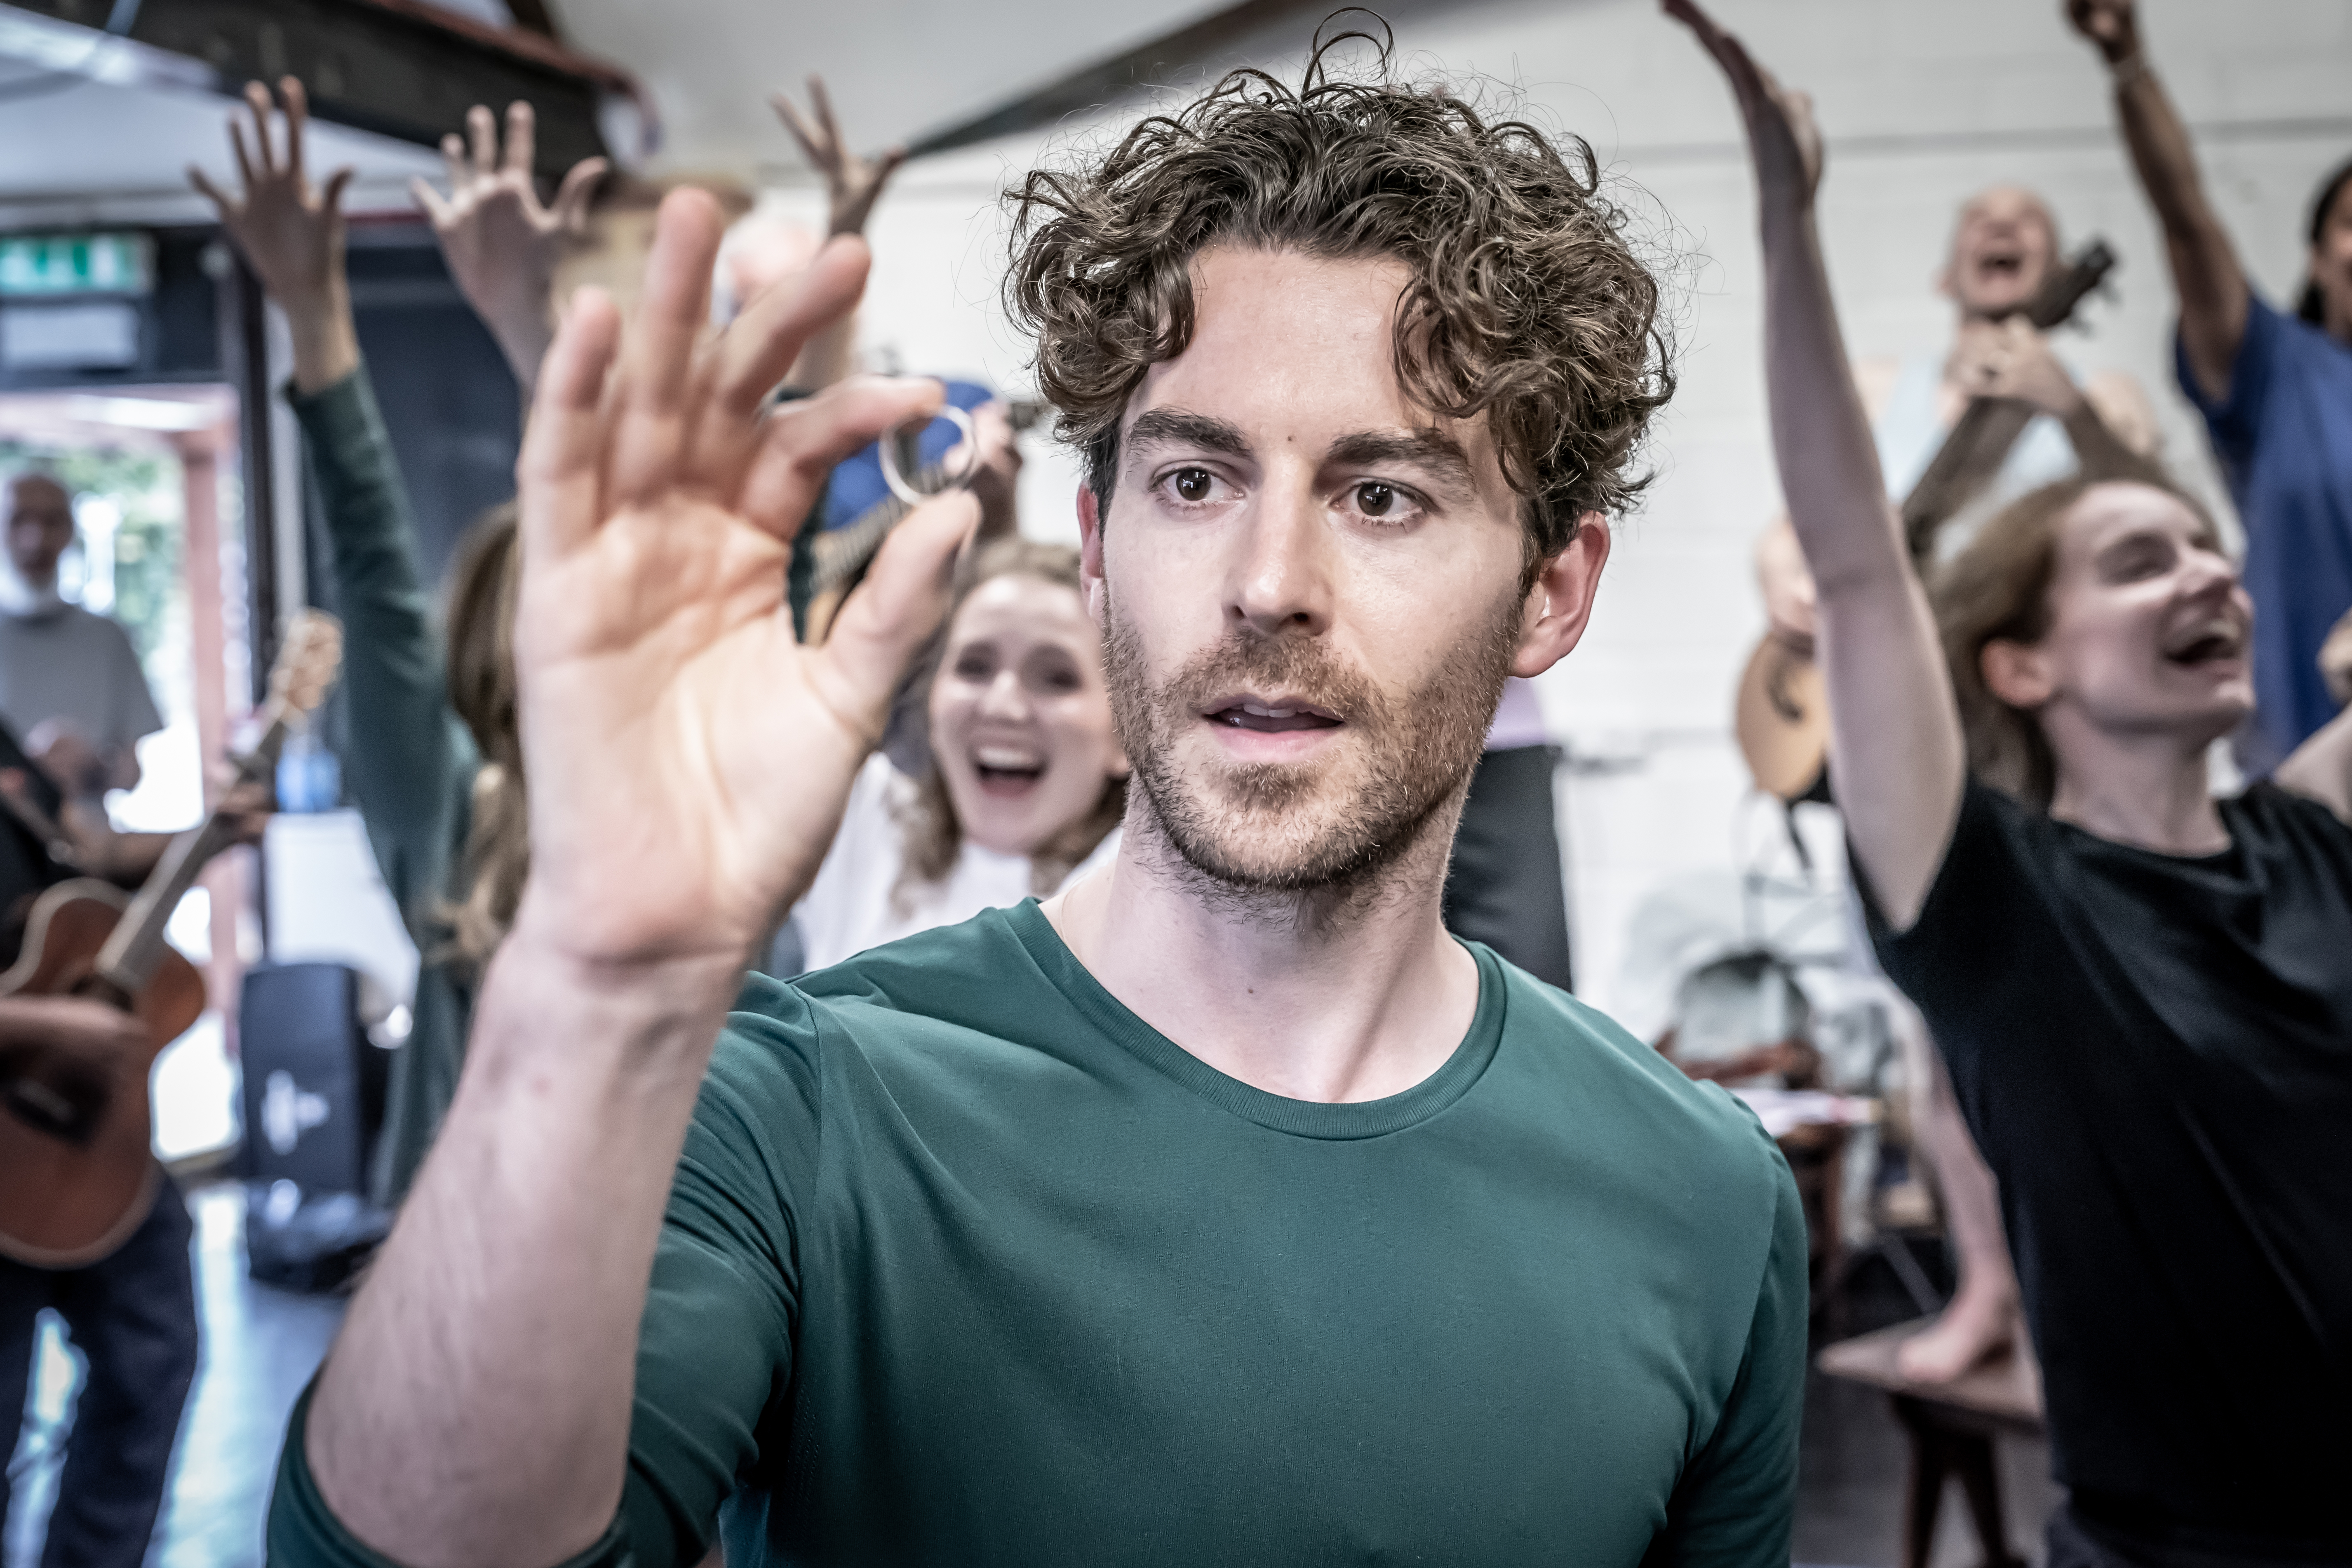 Cast Announced for Lord of the Rings at Watermill Theatre - Theatre Weekly